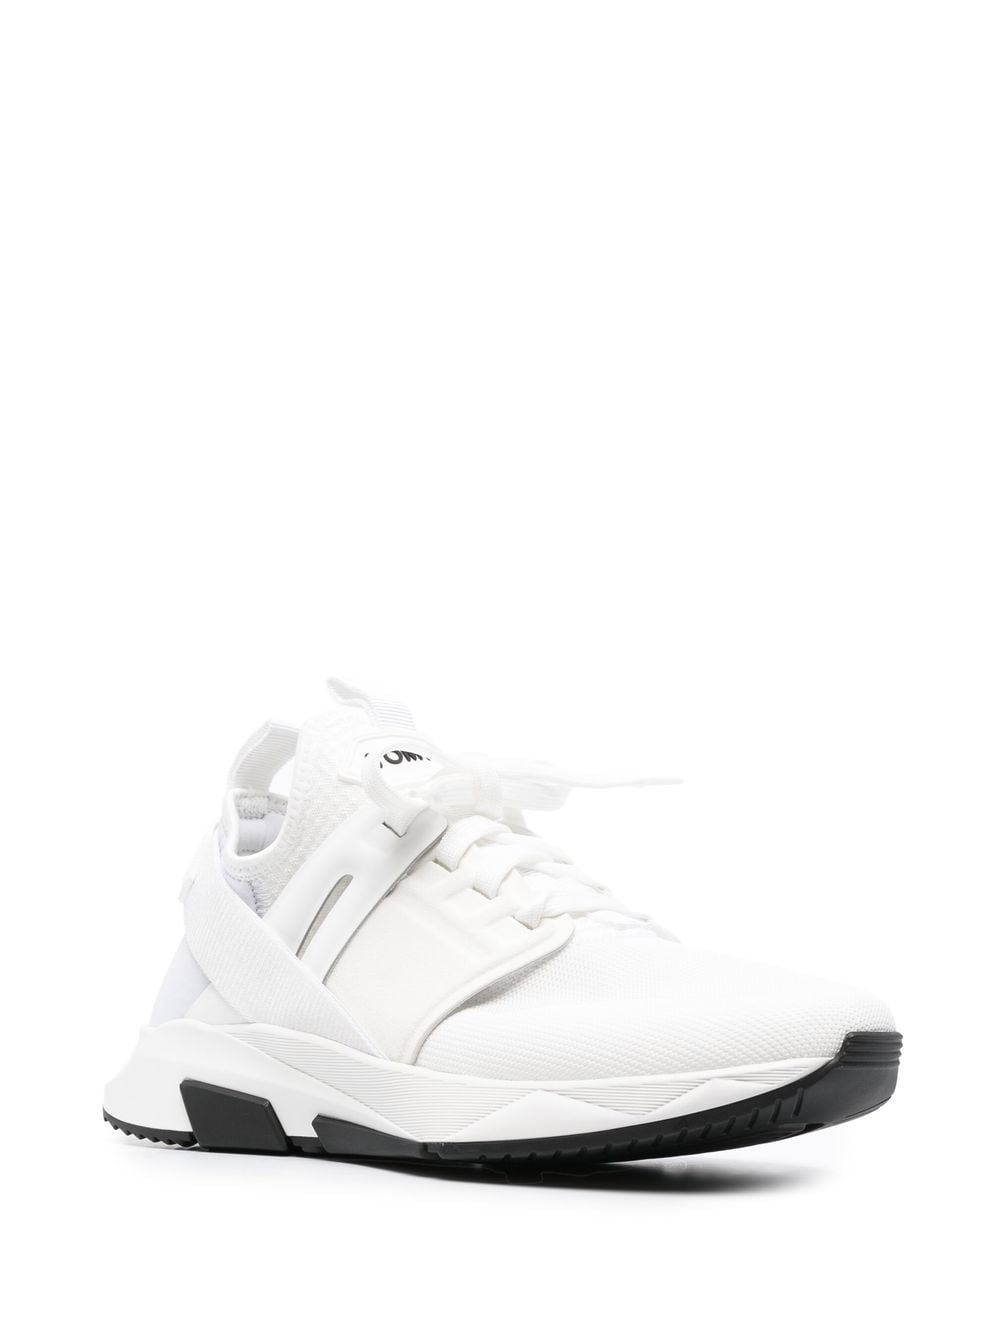 TOM FORD Men's White Neoprene and Suede Lace-Up Sneaker for FW23